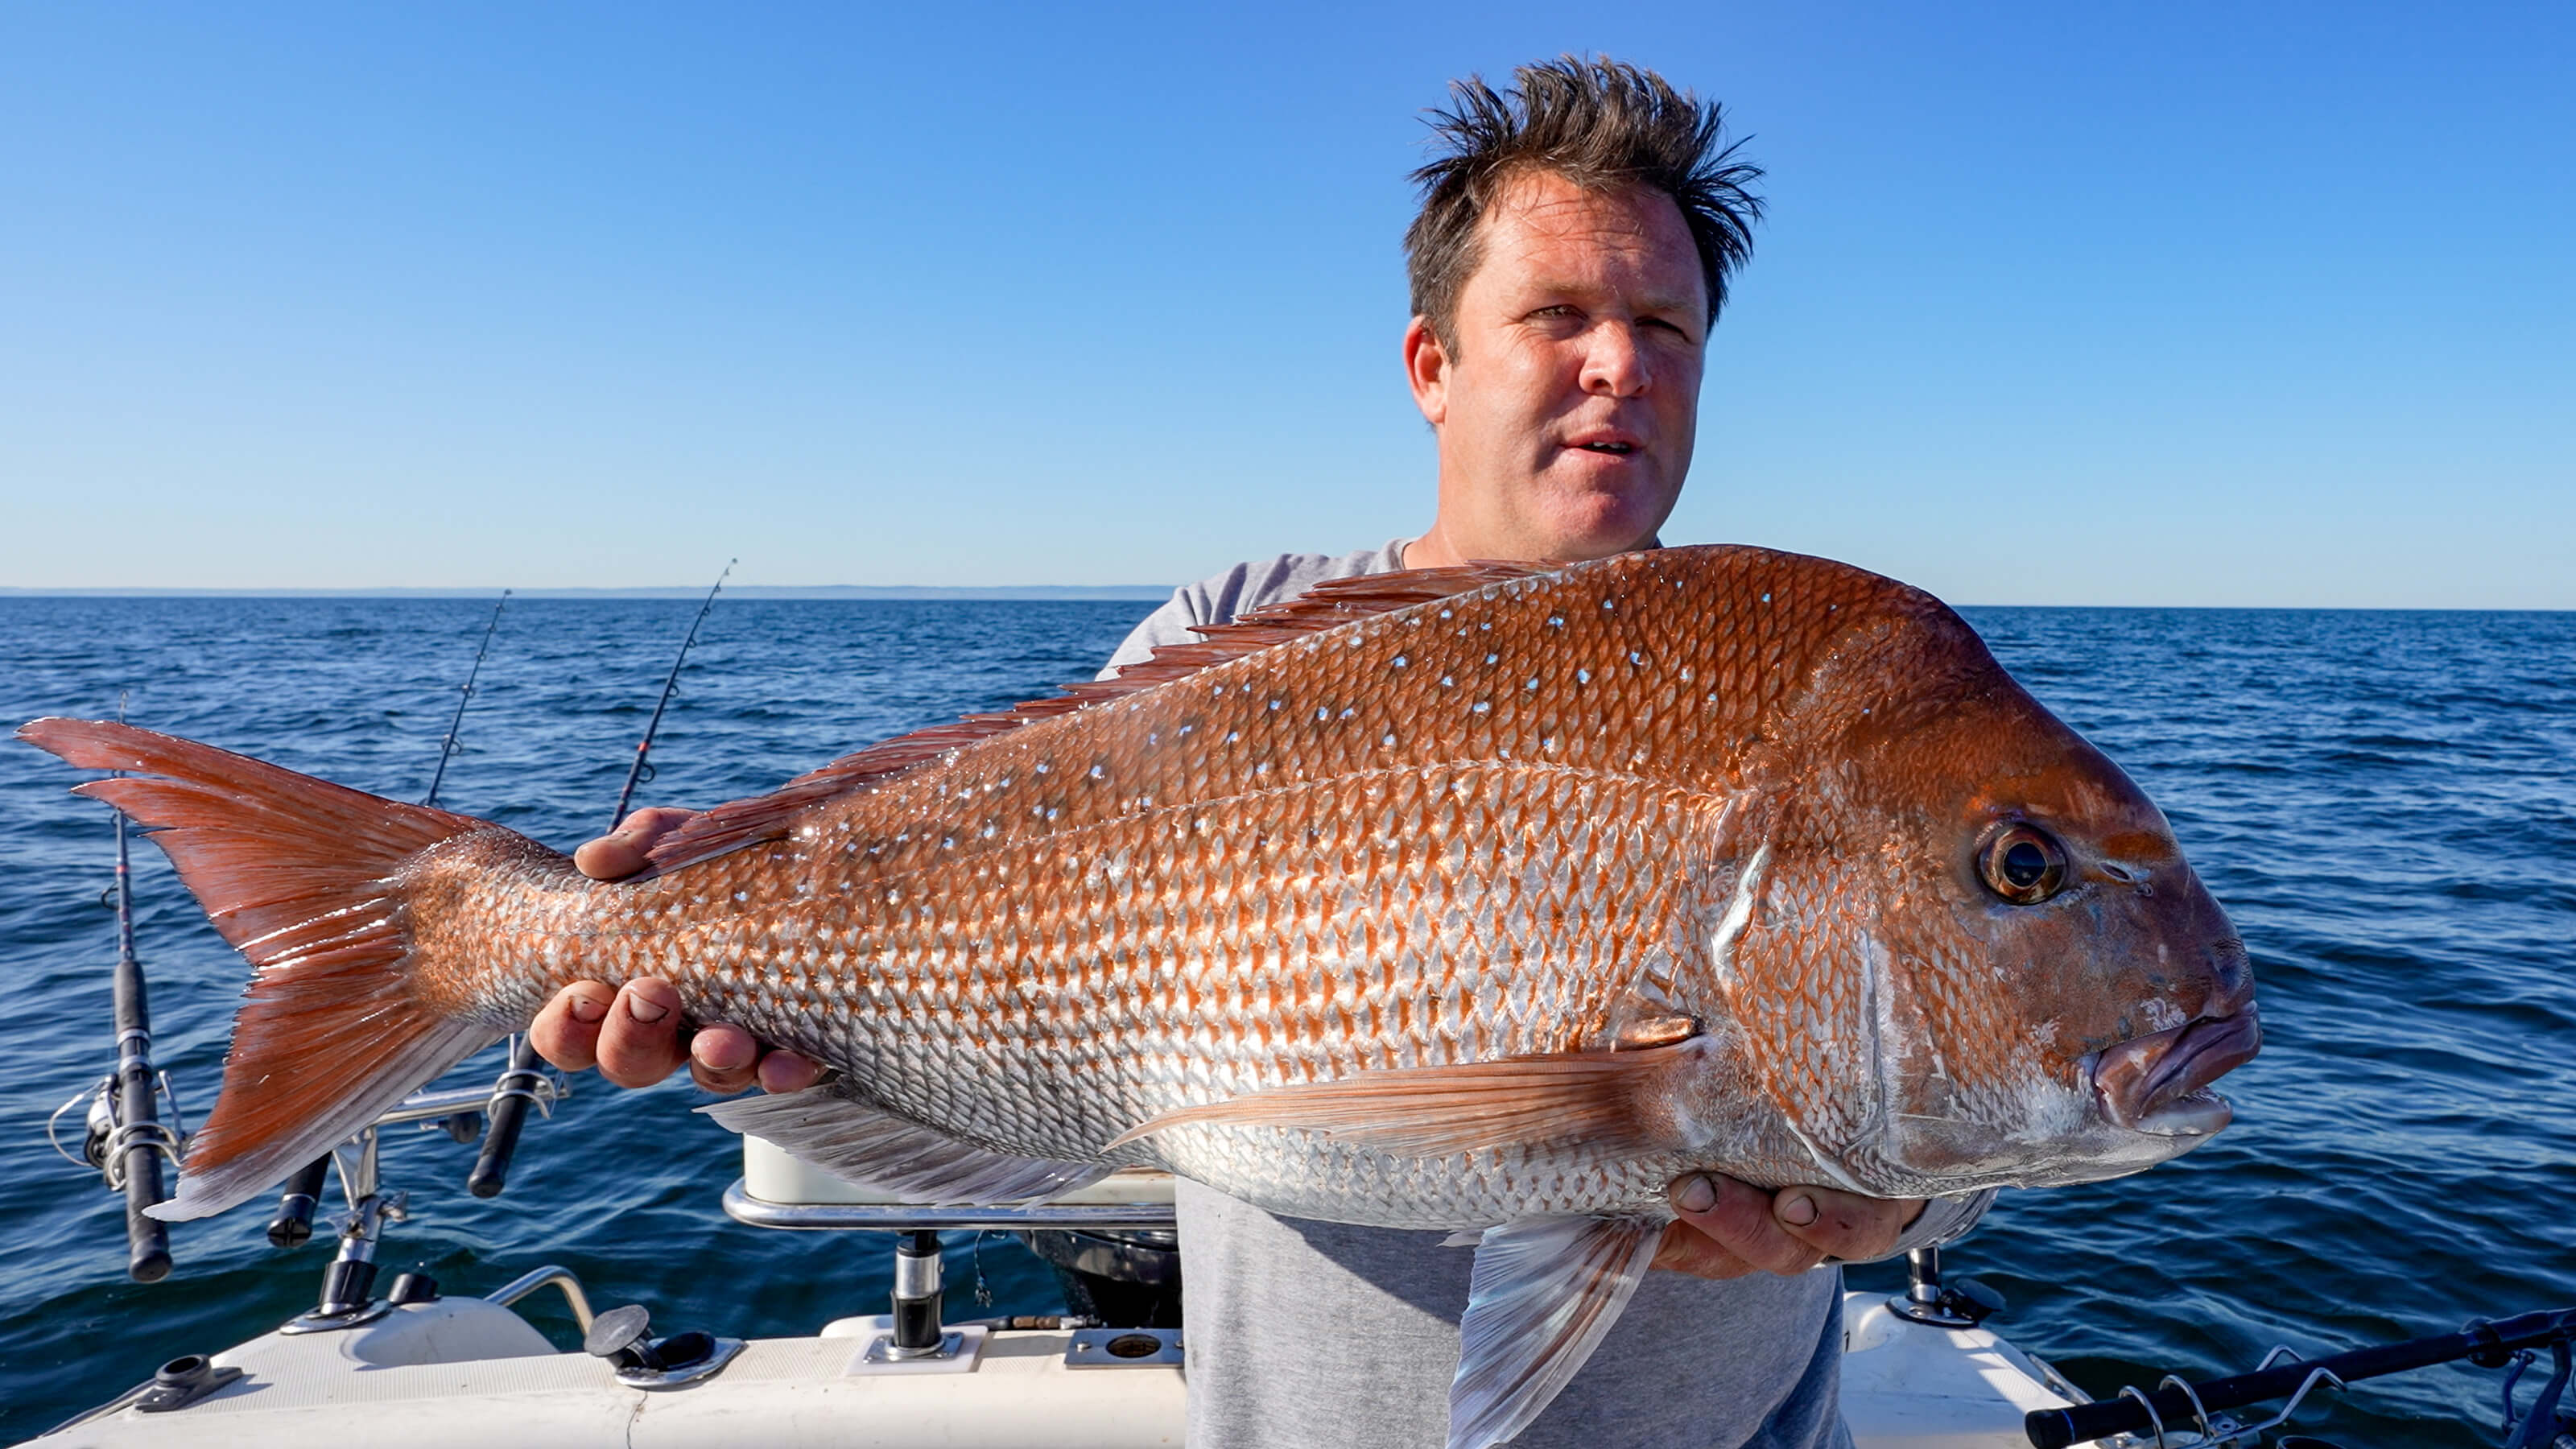 Mornington is a great place to fish for snapper